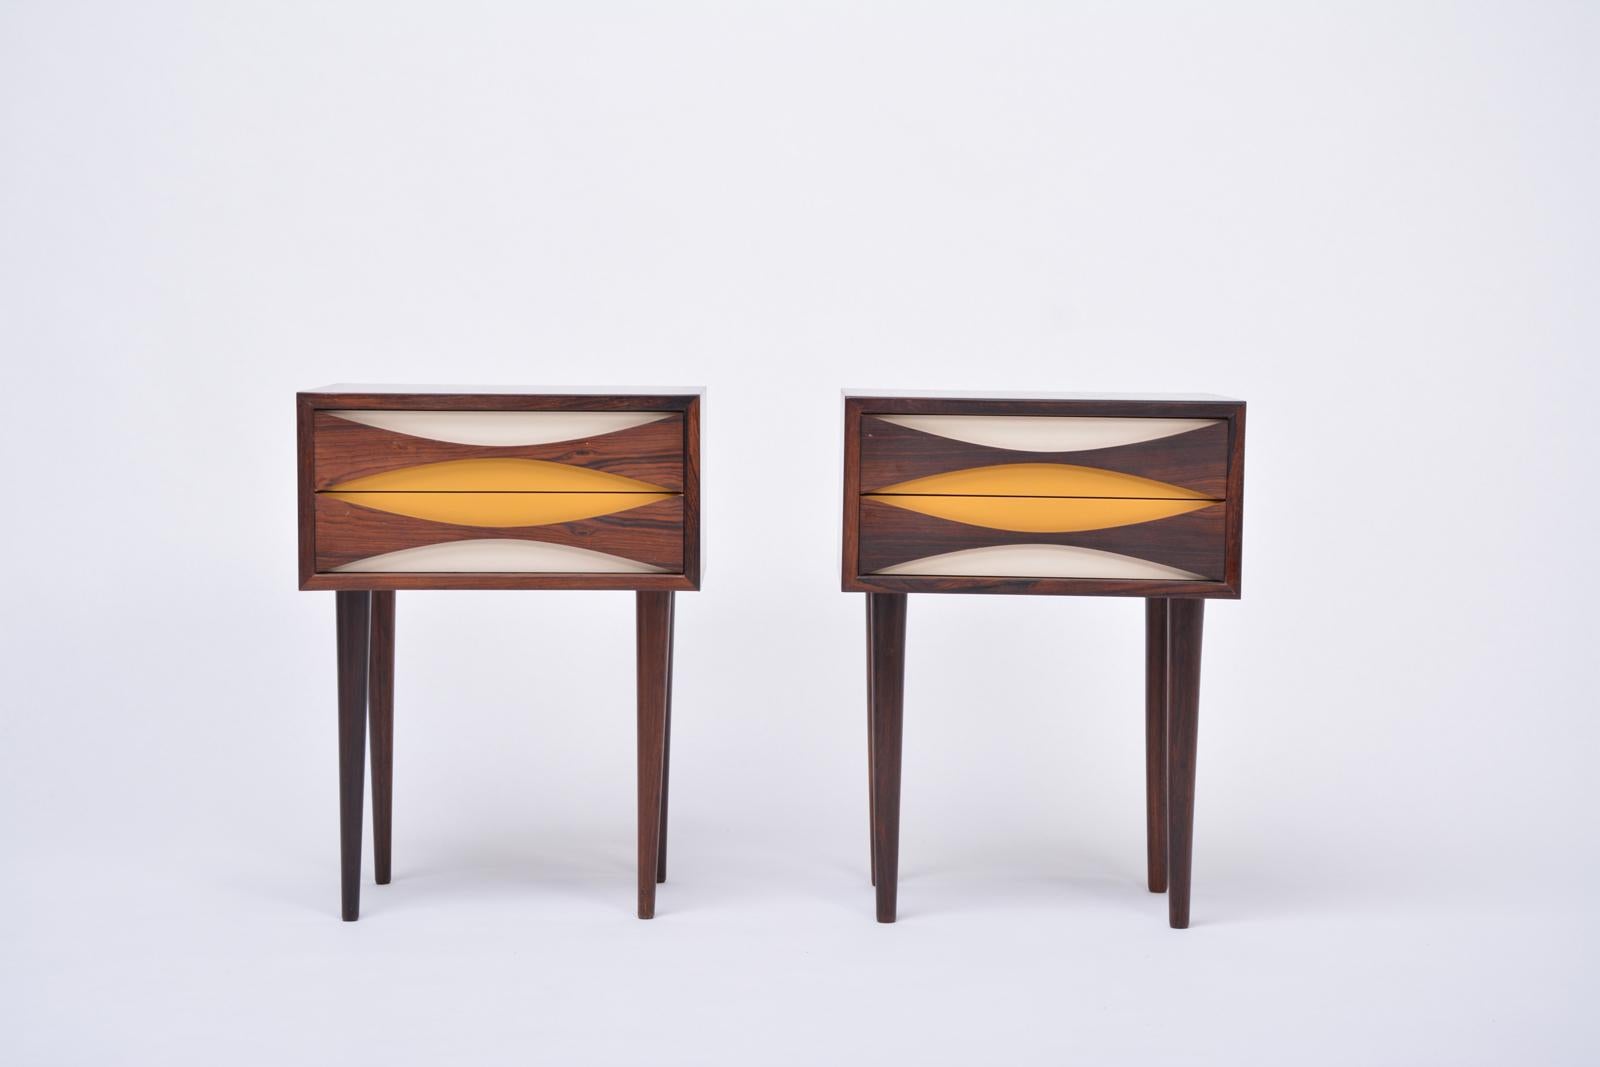 Pair of nightstand cabinets designed by Niels Clausen for NC Mobler in Odense, Denmark. Produced circa 1960s each with two drawers with scalloped pulls and solid tapered legs. Often misattributed to Arne Vodder. Fronts have been lacquered.